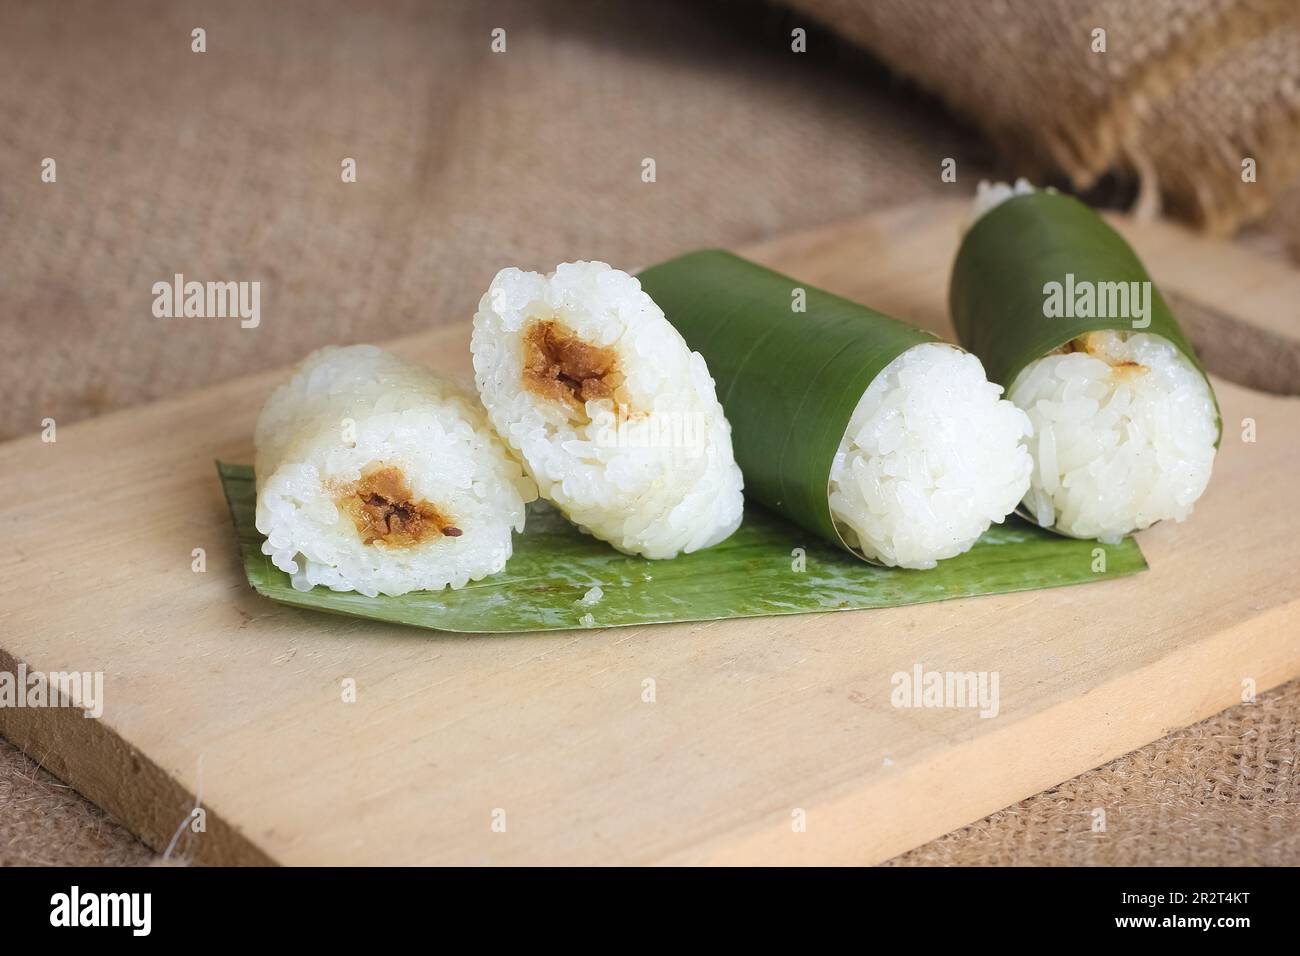 Indonesian traditional food lemper. rice cakes with banana leaves and chicken inside Stock Photo